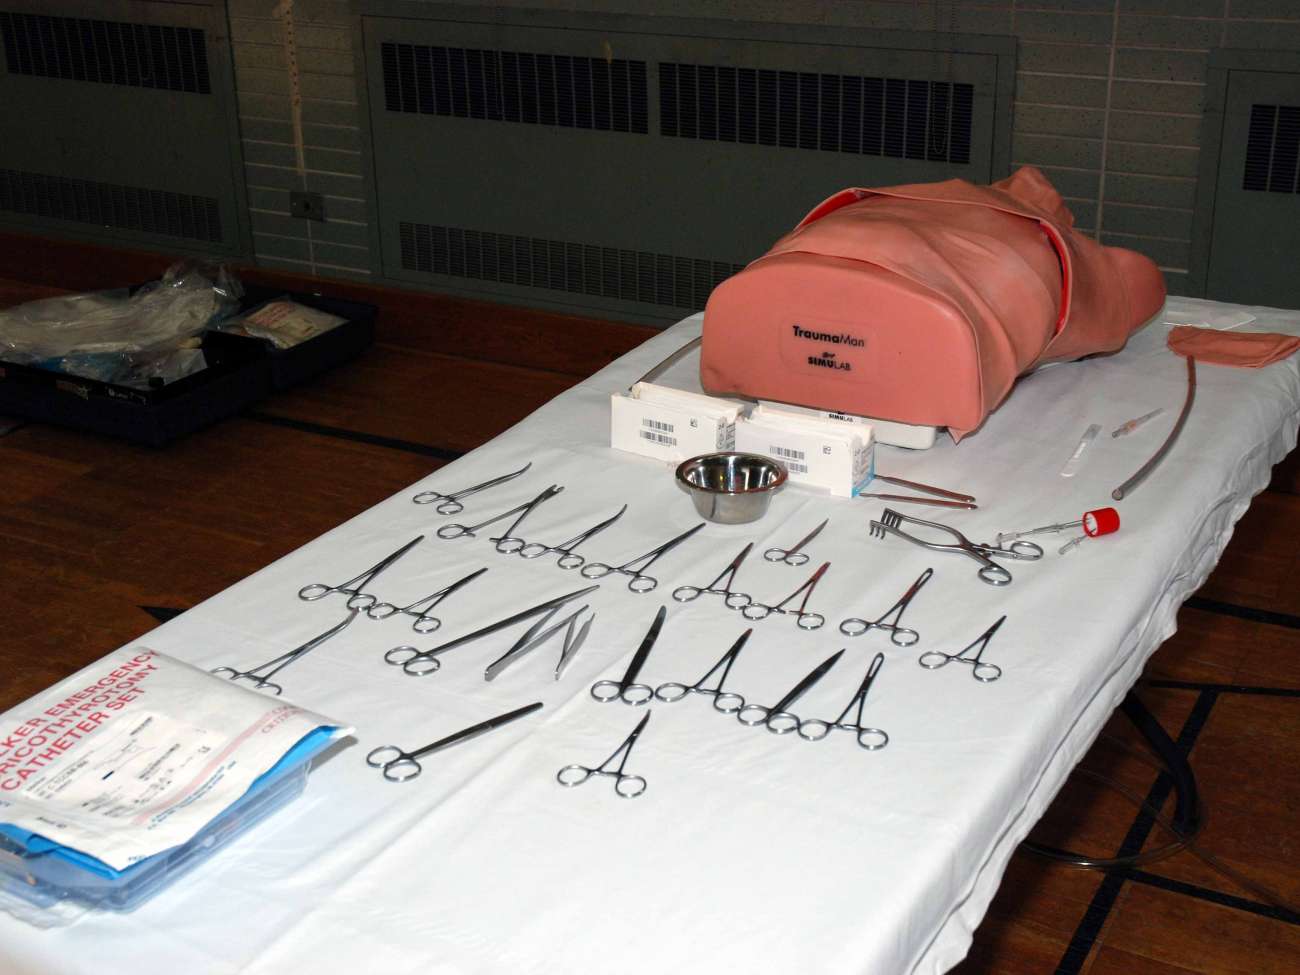 An additional demonstration model for advanced trauma life support training